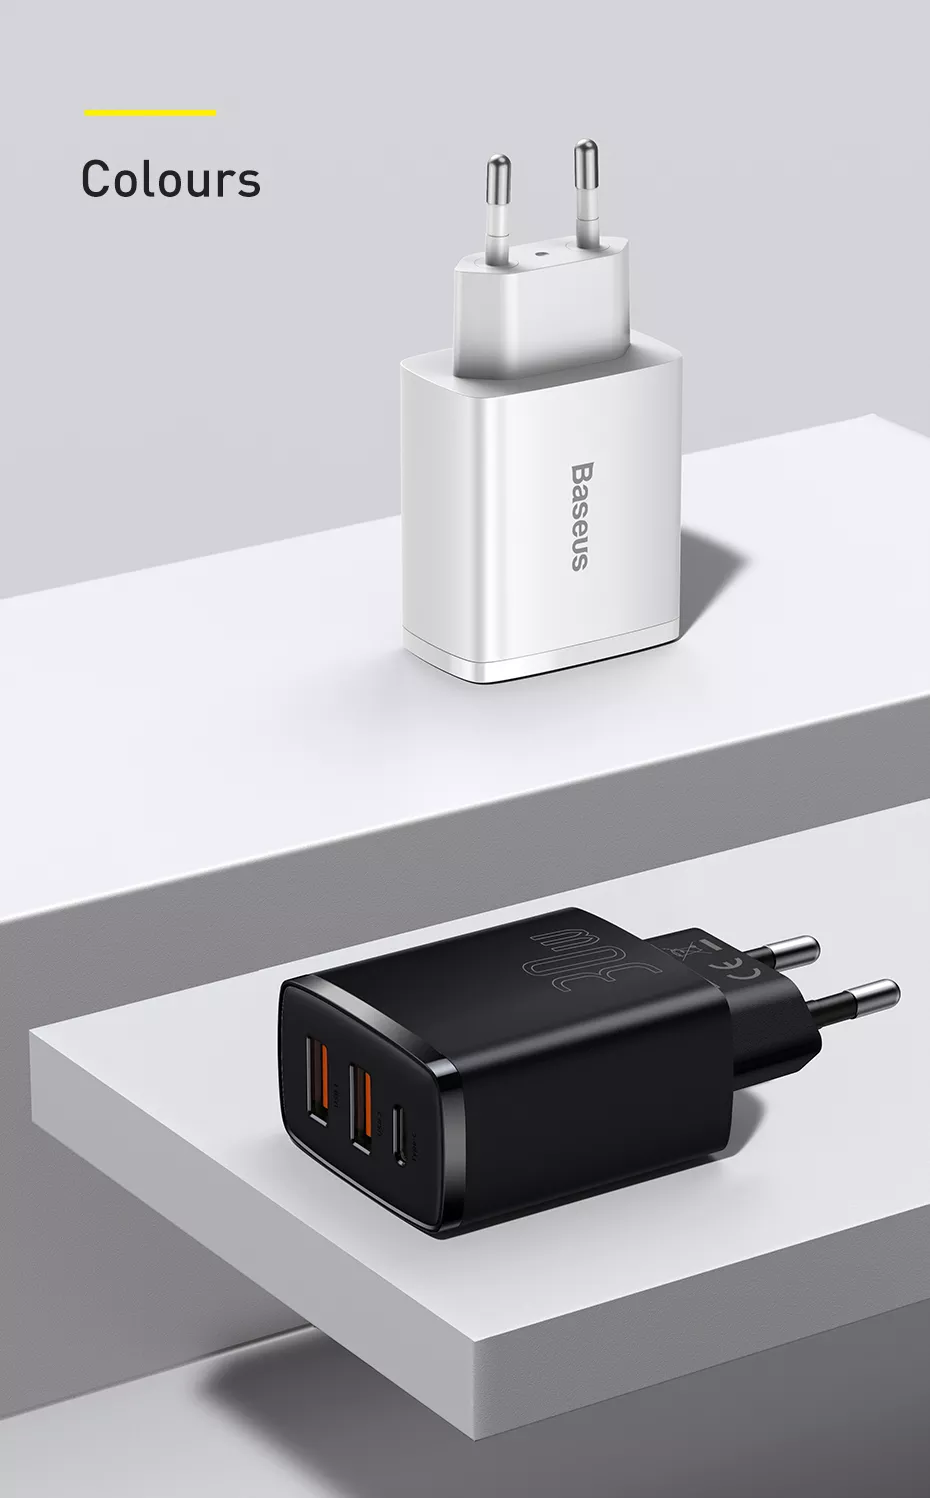 Cu Sac Nhanh Sieu Nho Gon Baseus Compact Quick Charger 30wusb Dual Port Type C30w Pd Qc3 0 Multi Quick Charge Support (4)